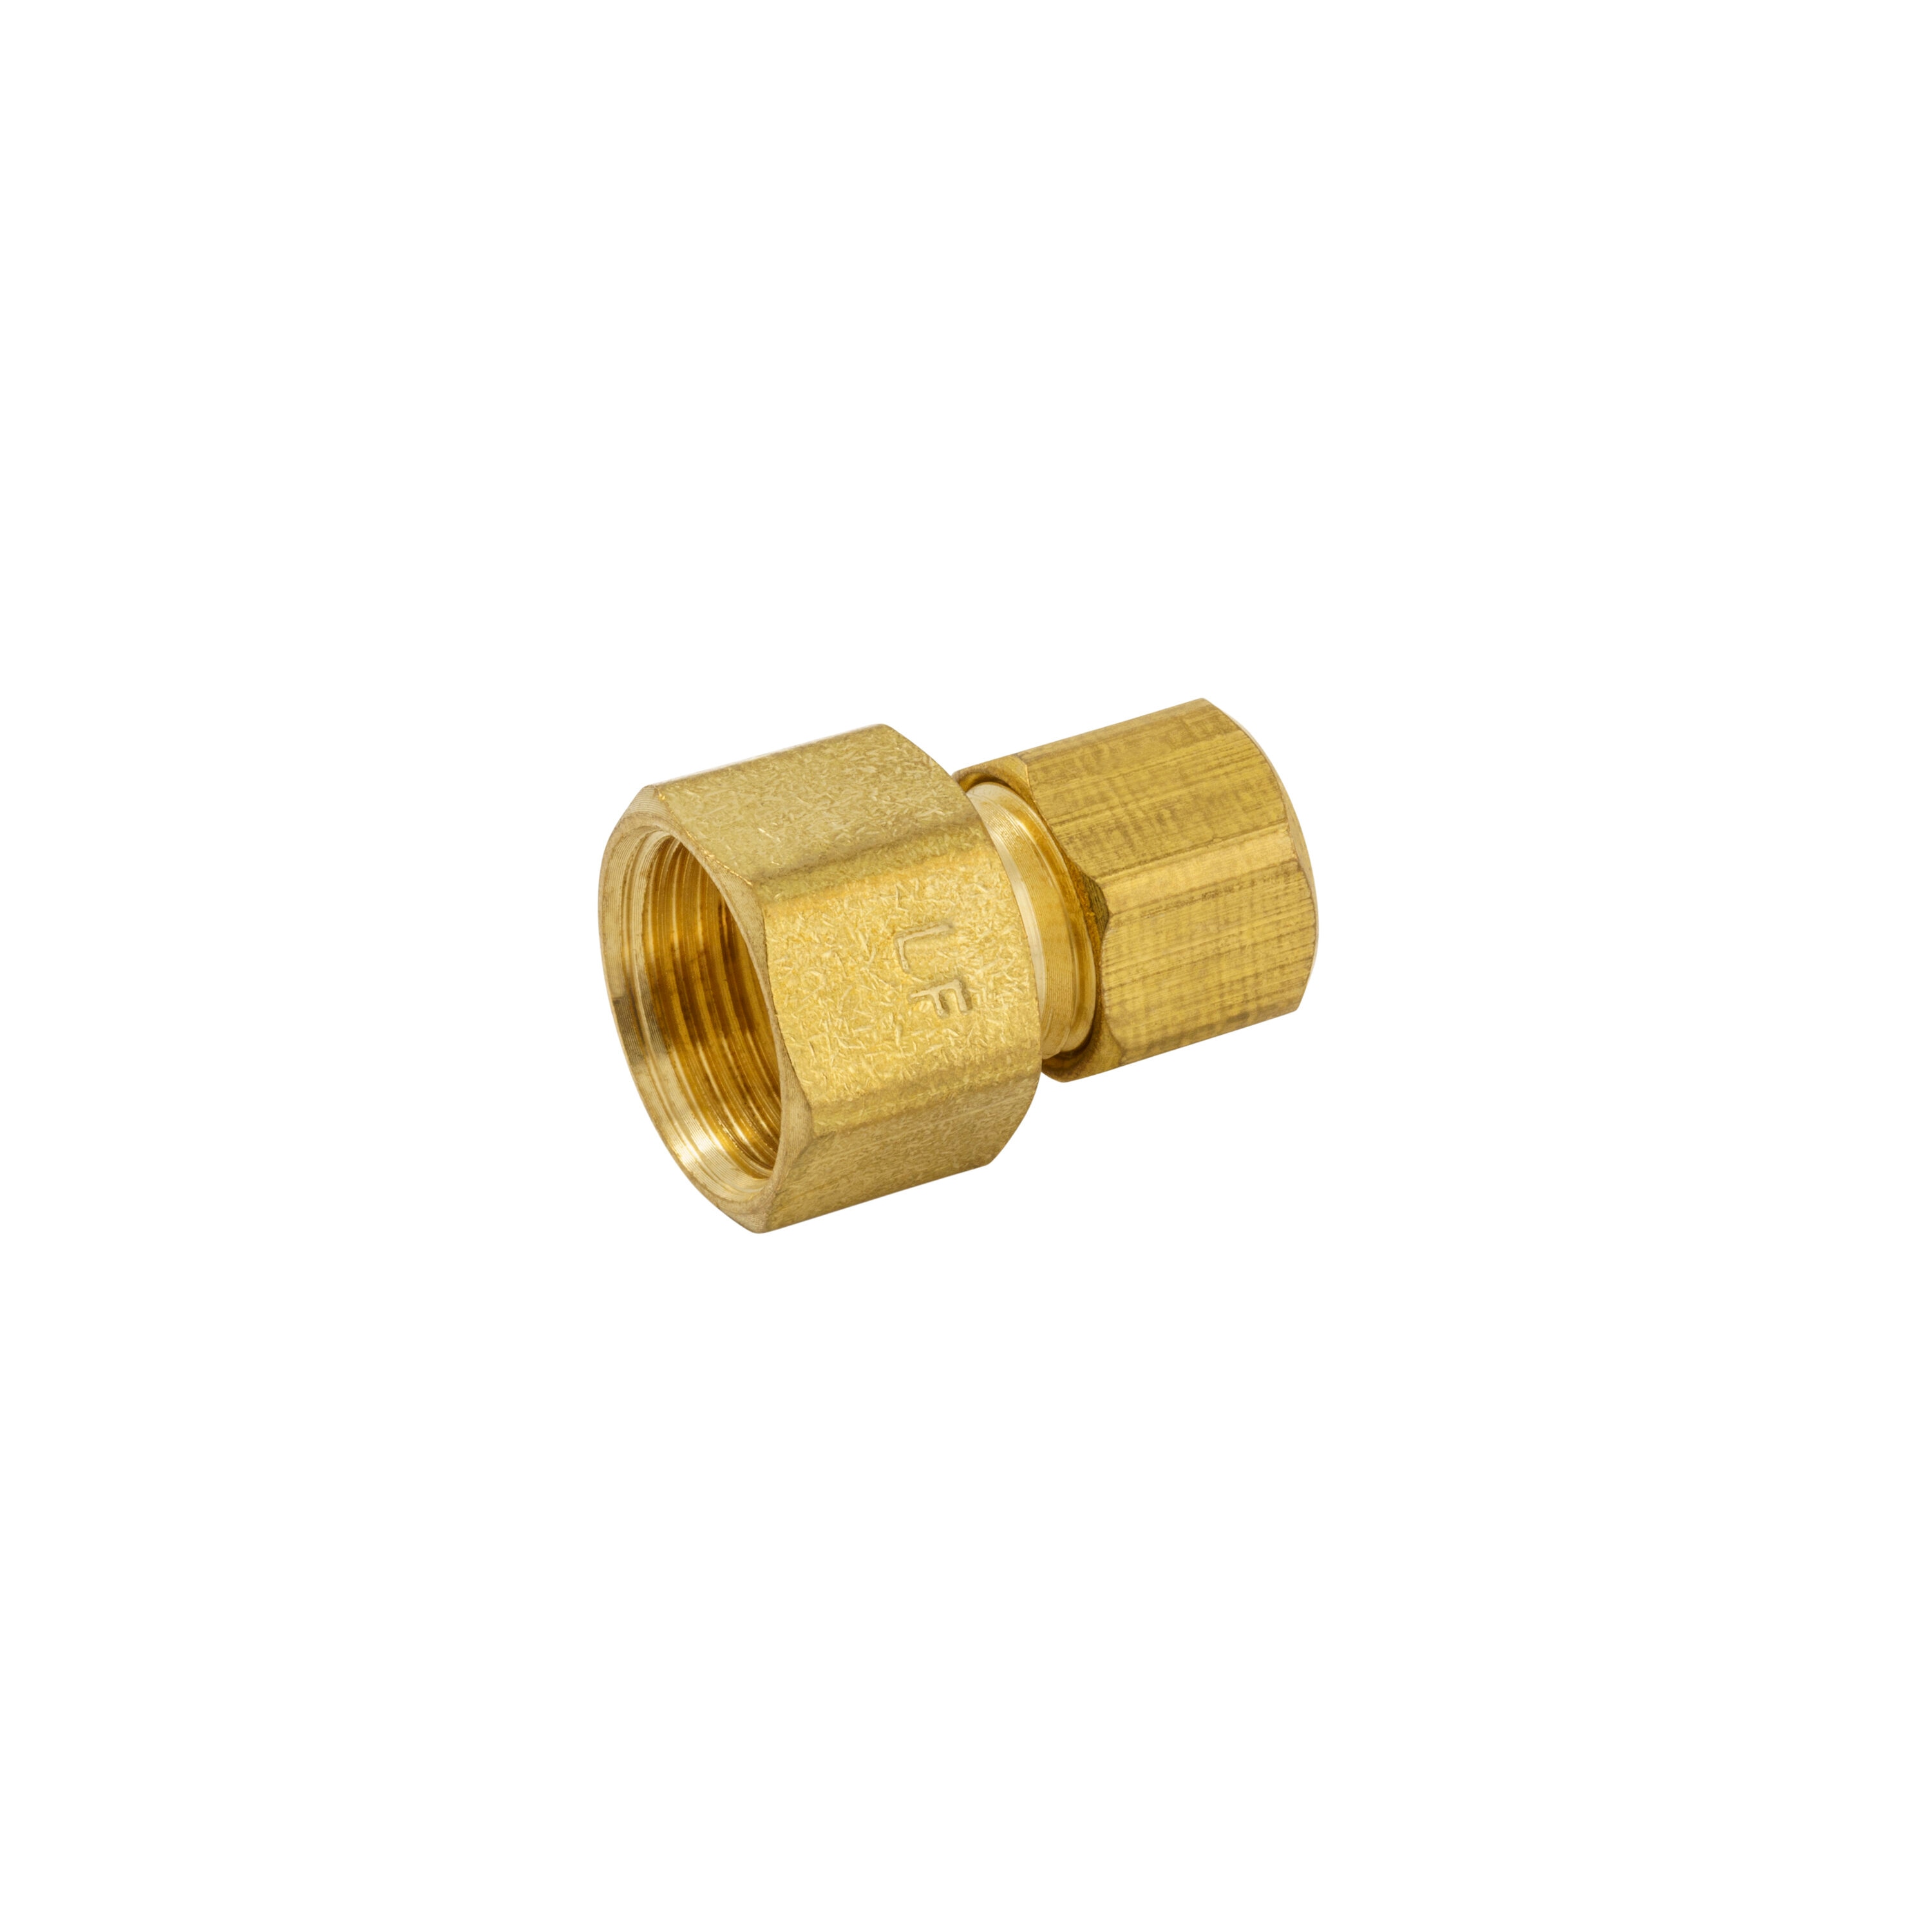 Sioux Chief 1/4 inch x 1/4 inch Brass Compression x Female Flare Adapter